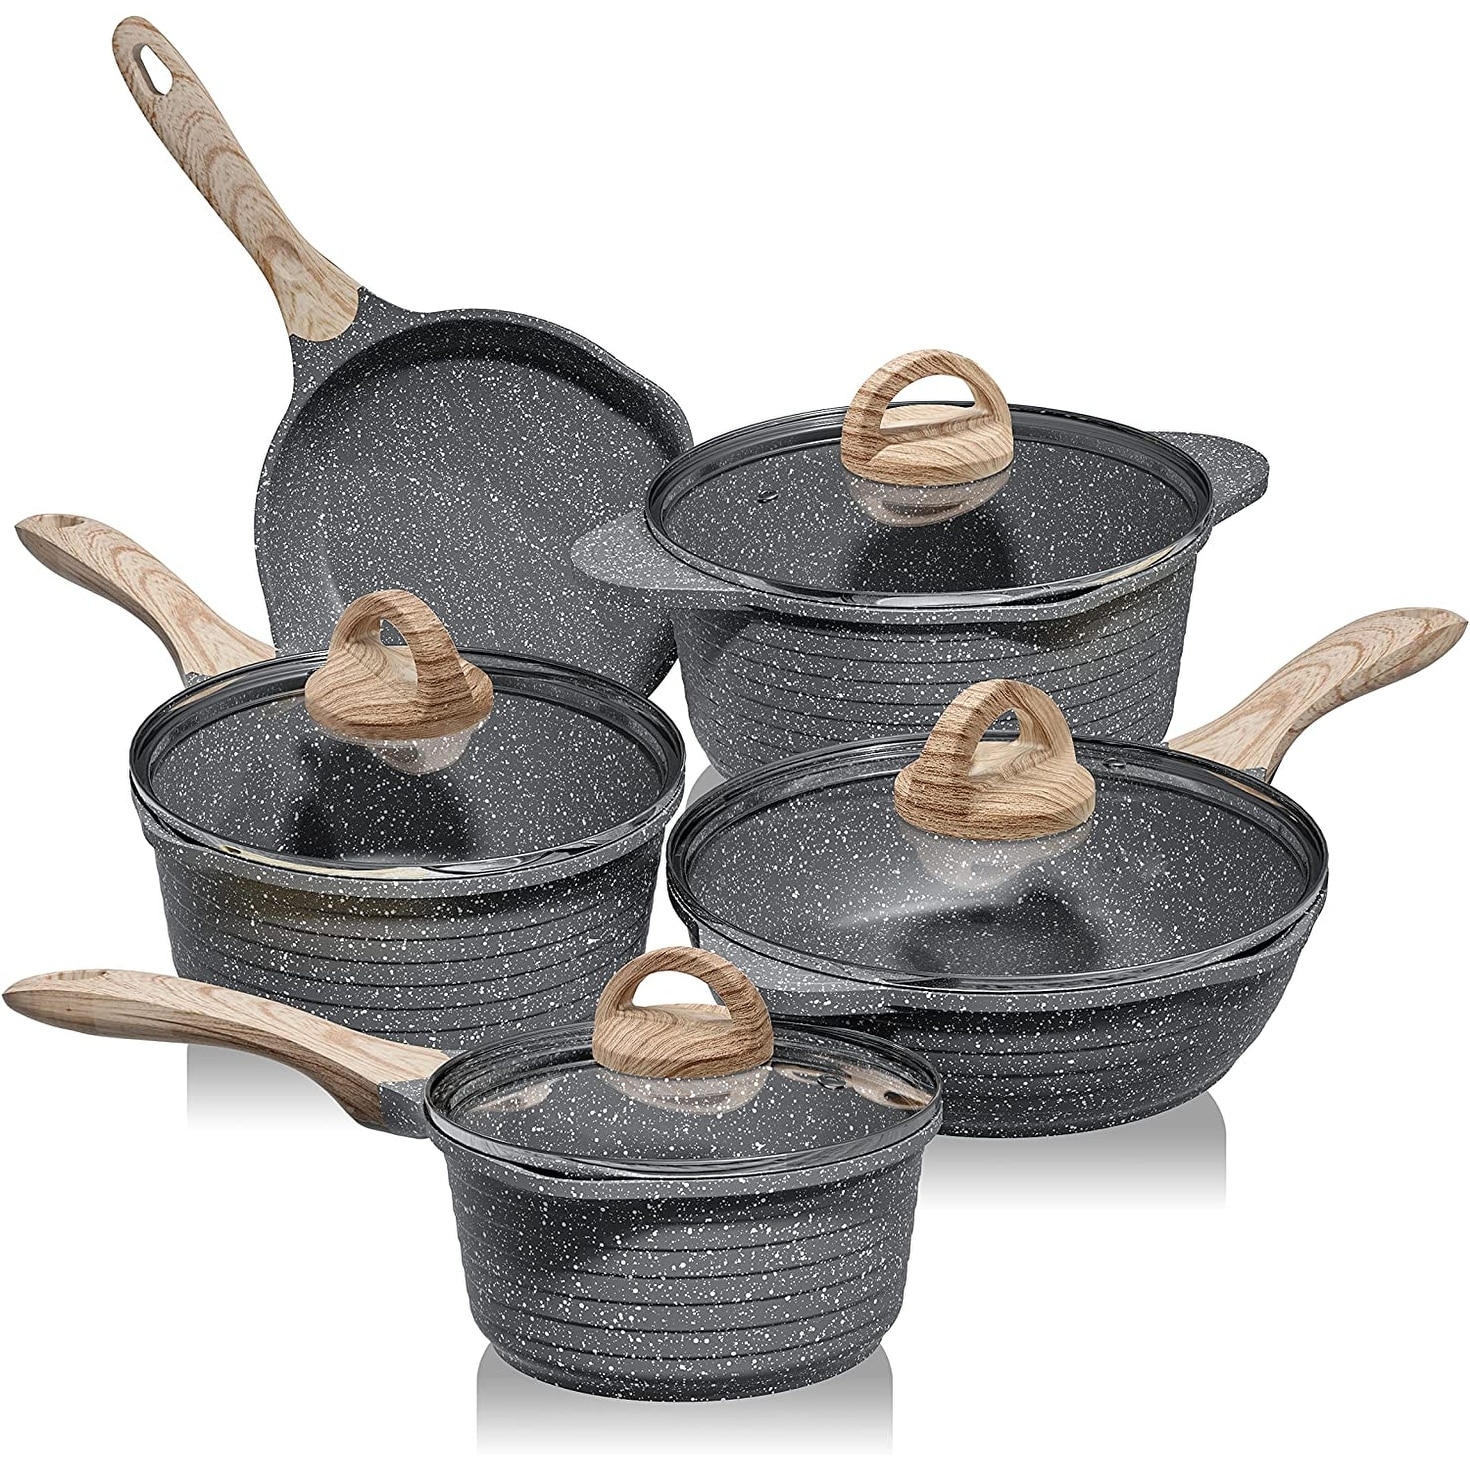 https://ak1.ostkcdn.com/images/products/is/images/direct/5a0e401121a912c9e84576eec16a6cc170f3c370/Pots-and-Pans-Set-Nonstick%2C-Granite-Coating-Cookware-Sets-Induction-Compatible-16-Pieces.jpg